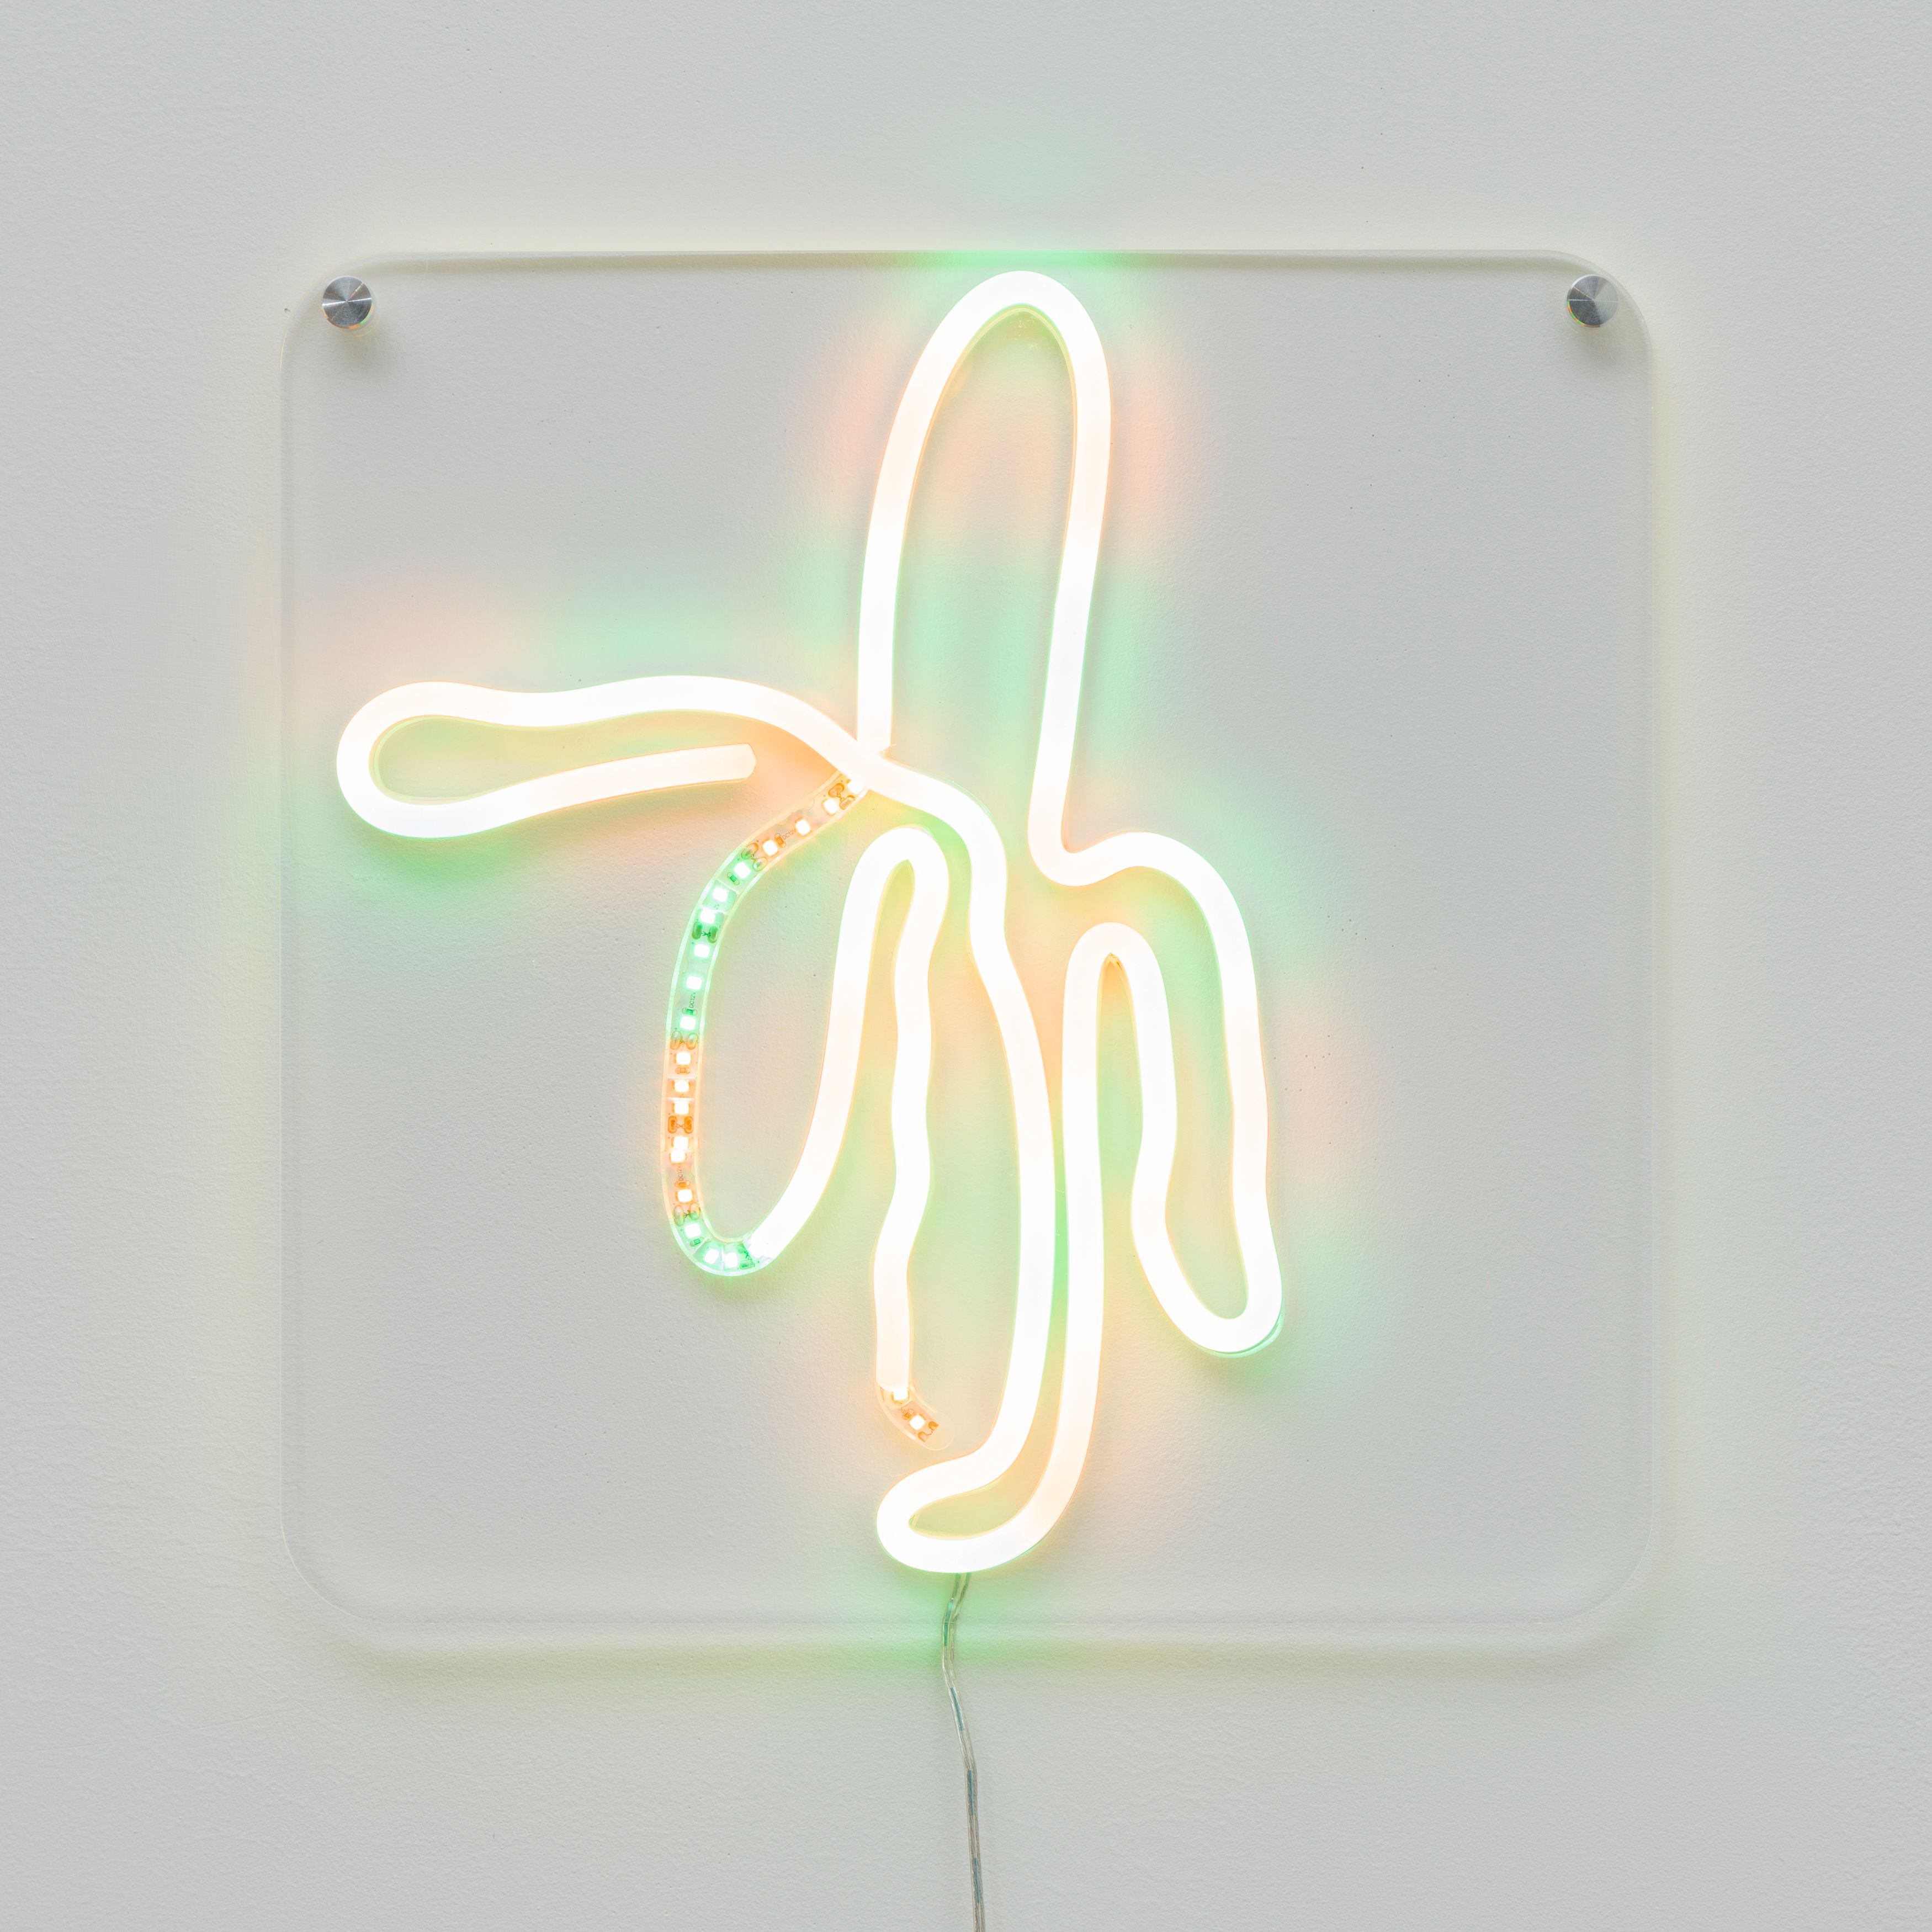 Choey Eun Young Cho, Bananananana (banana33), 2022, CNC engraved plexiglass, LED strip lights, connection wires, silicone tubes, 12 x 12 in. (30.48 x 30.48 cm)